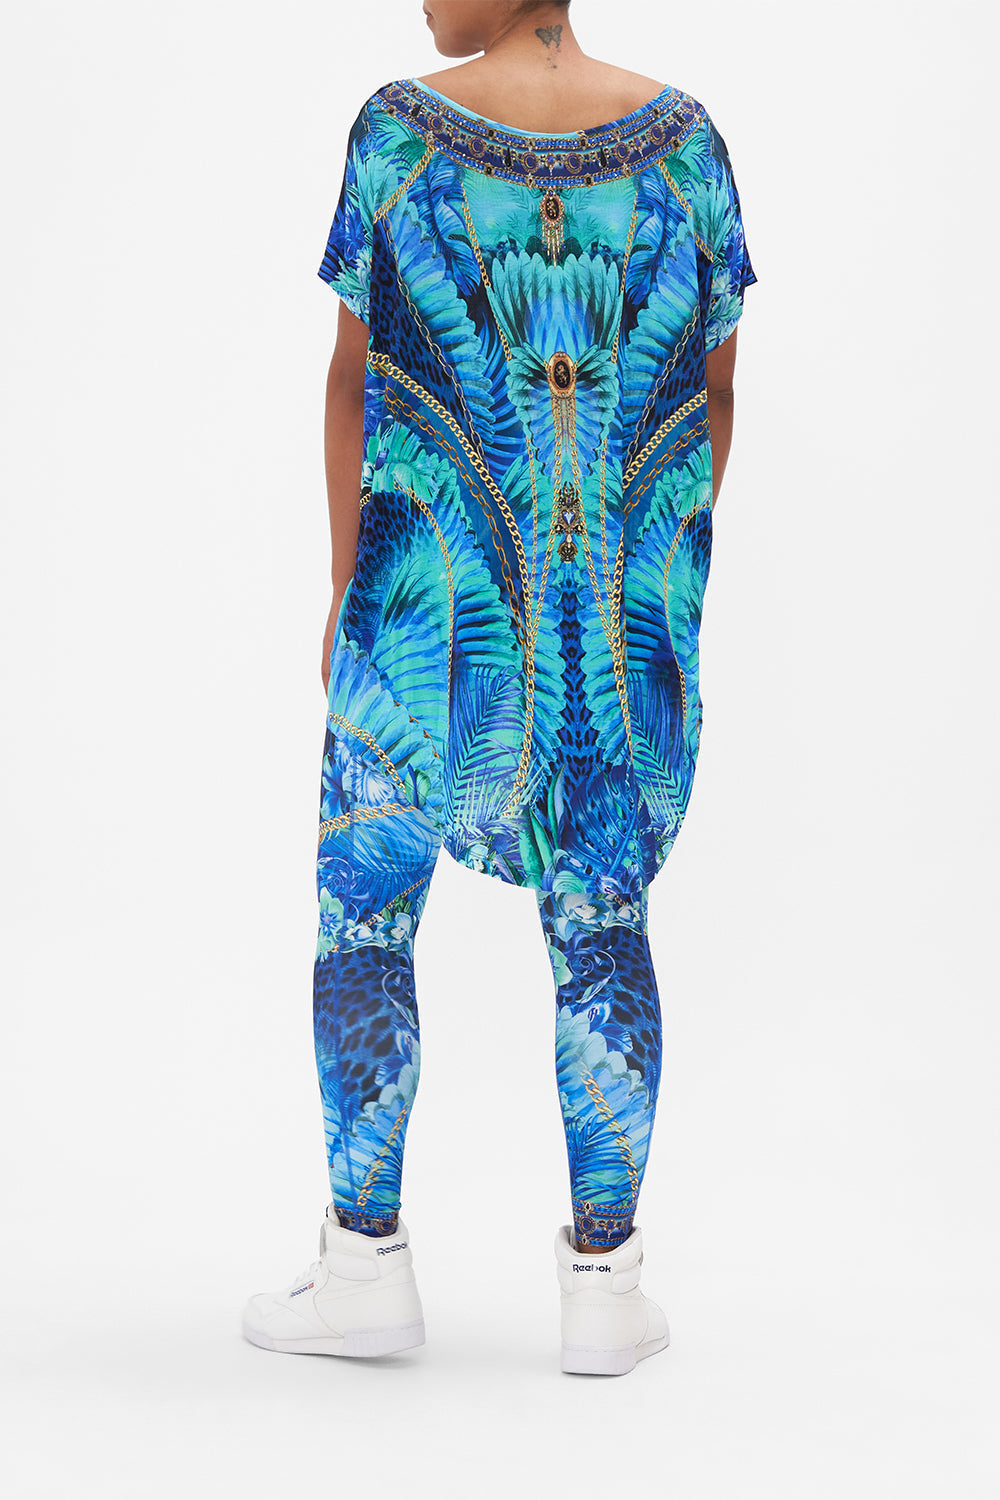 Jungle Tee, | Fit CAMILLA Song The Loose US – Of CAMILLA